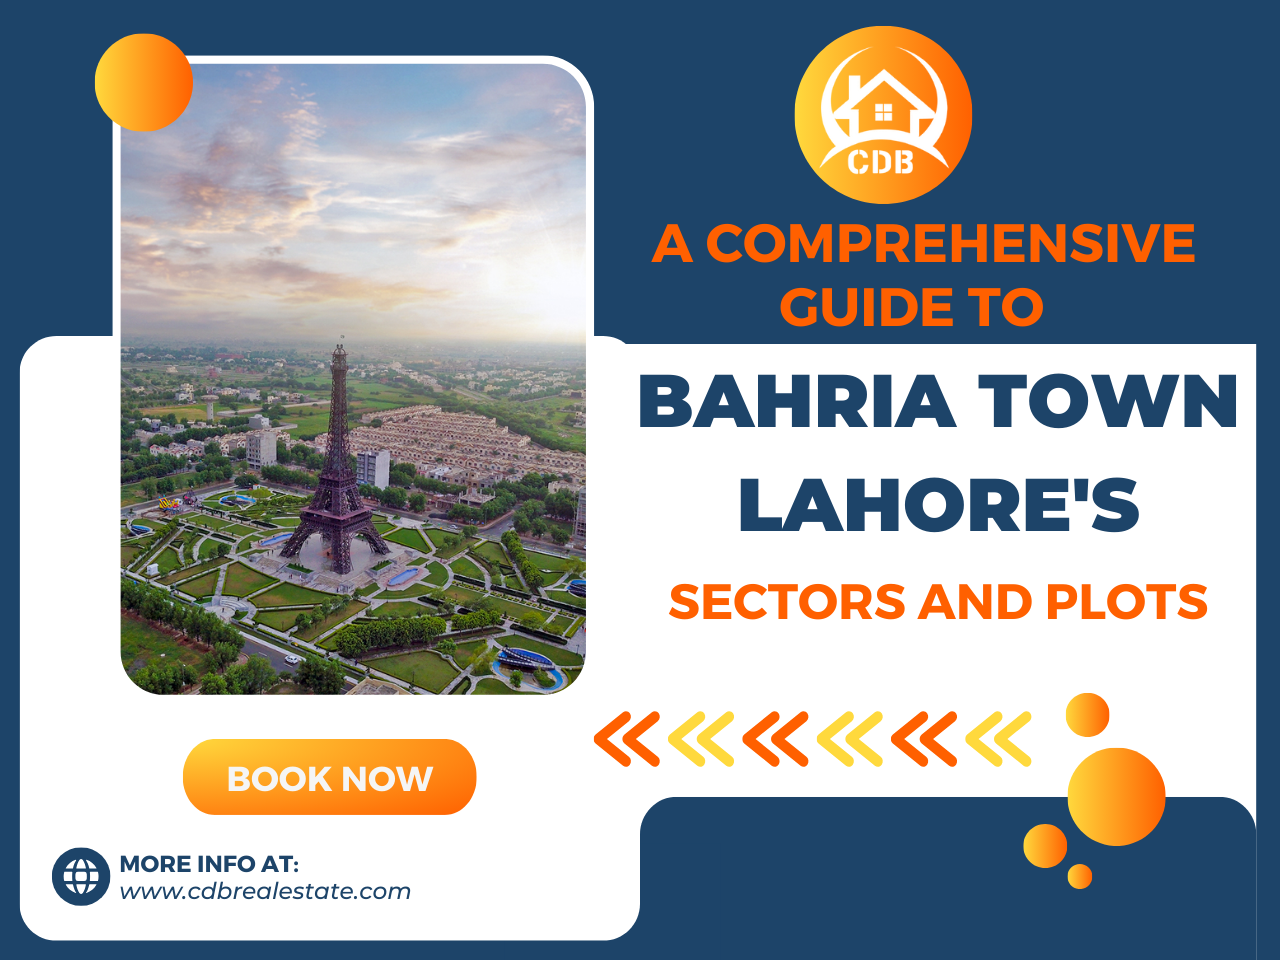 A Comprehensive Guide to Bahria Town Lahore's Sectors and Plots